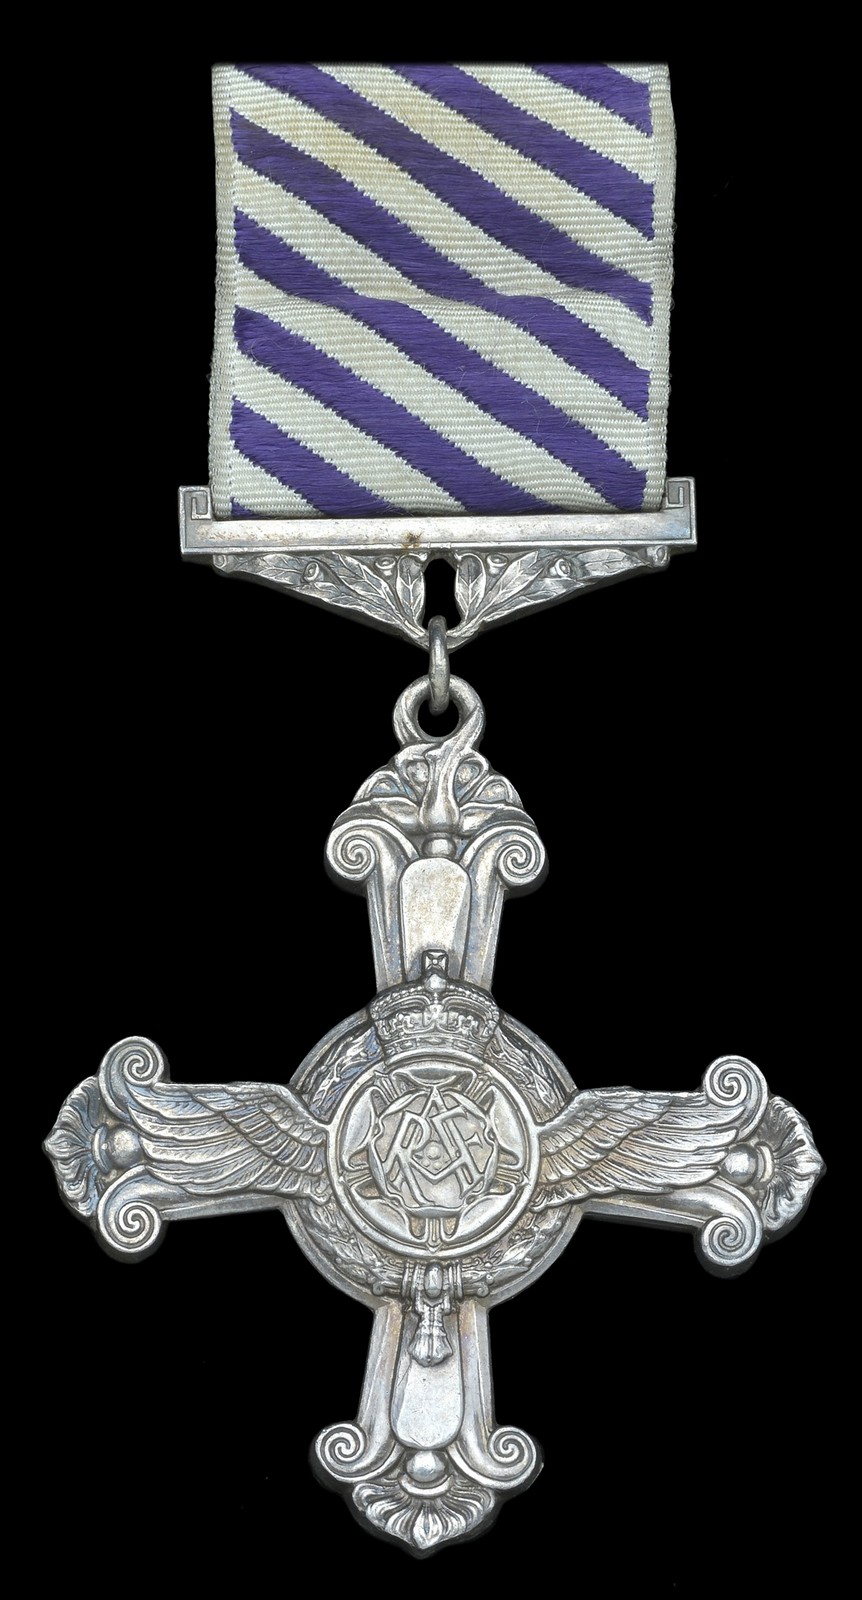 Distinguished Flying Cross, G.VI.R., reverse officially dated ‘1943’, extremely fine	 £800-1000